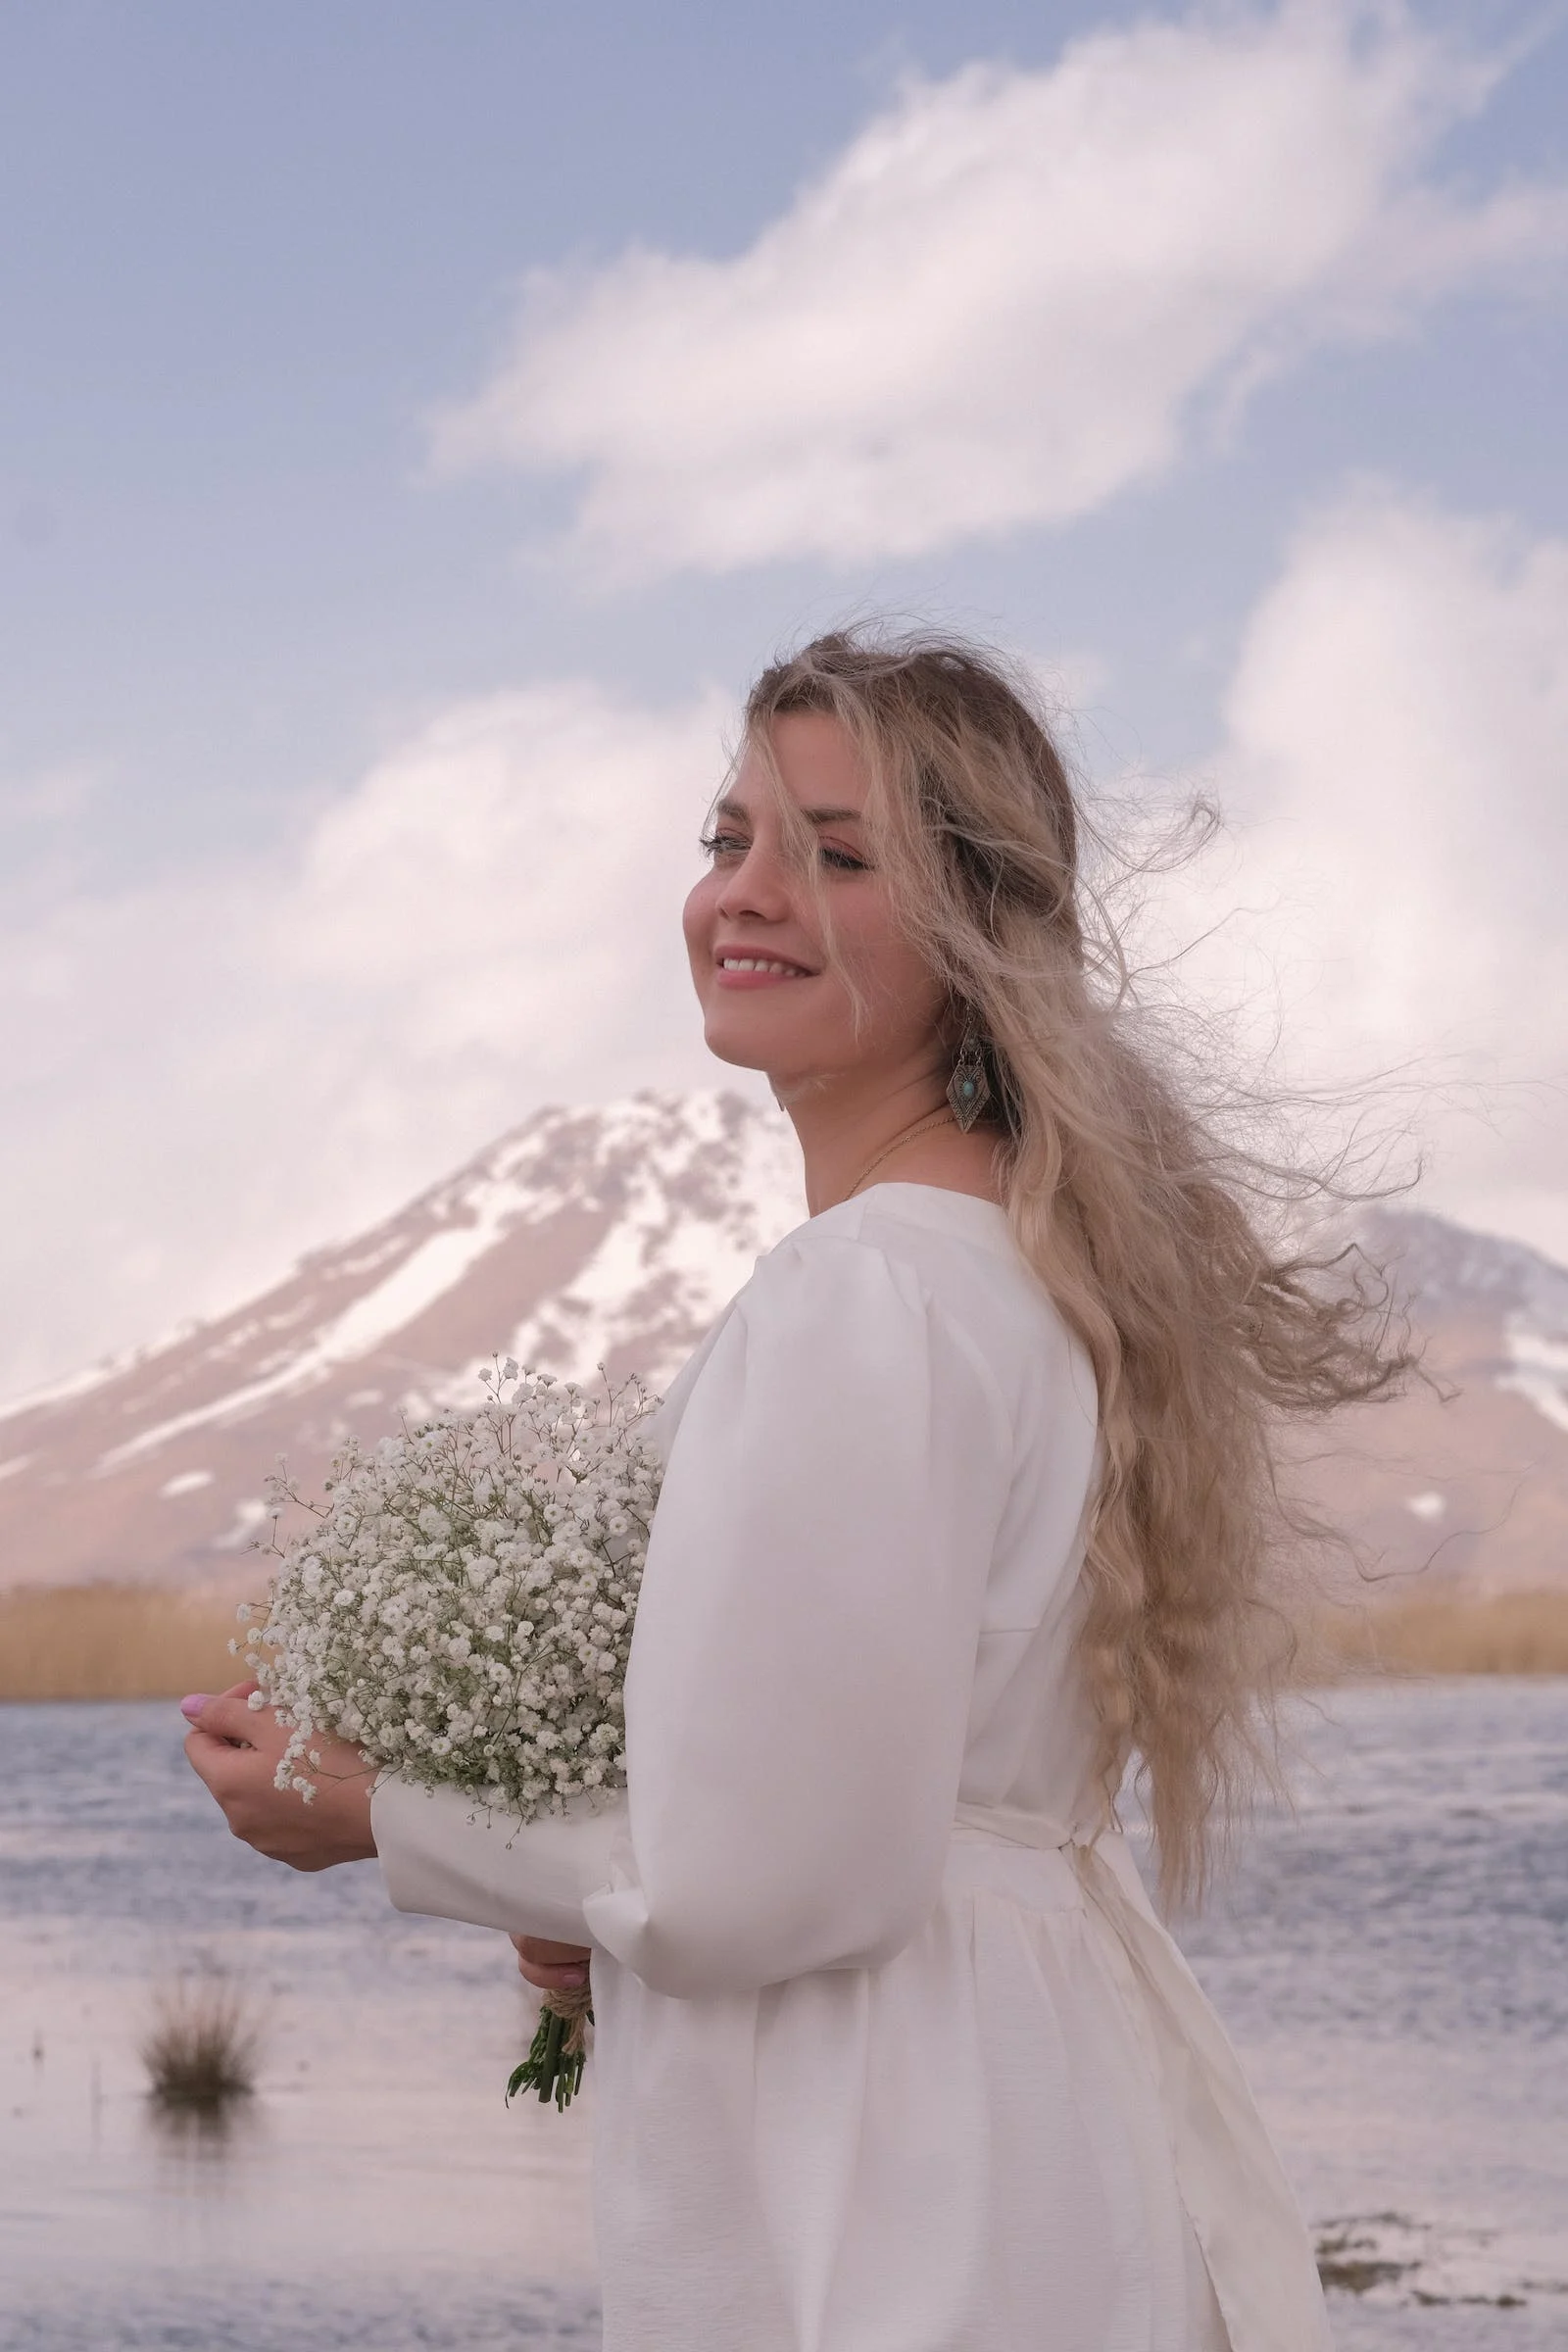 Smiling bride holding a bunch of baby's breath flowers, blonde hair tousled by the breeze, lake and mountain in the background